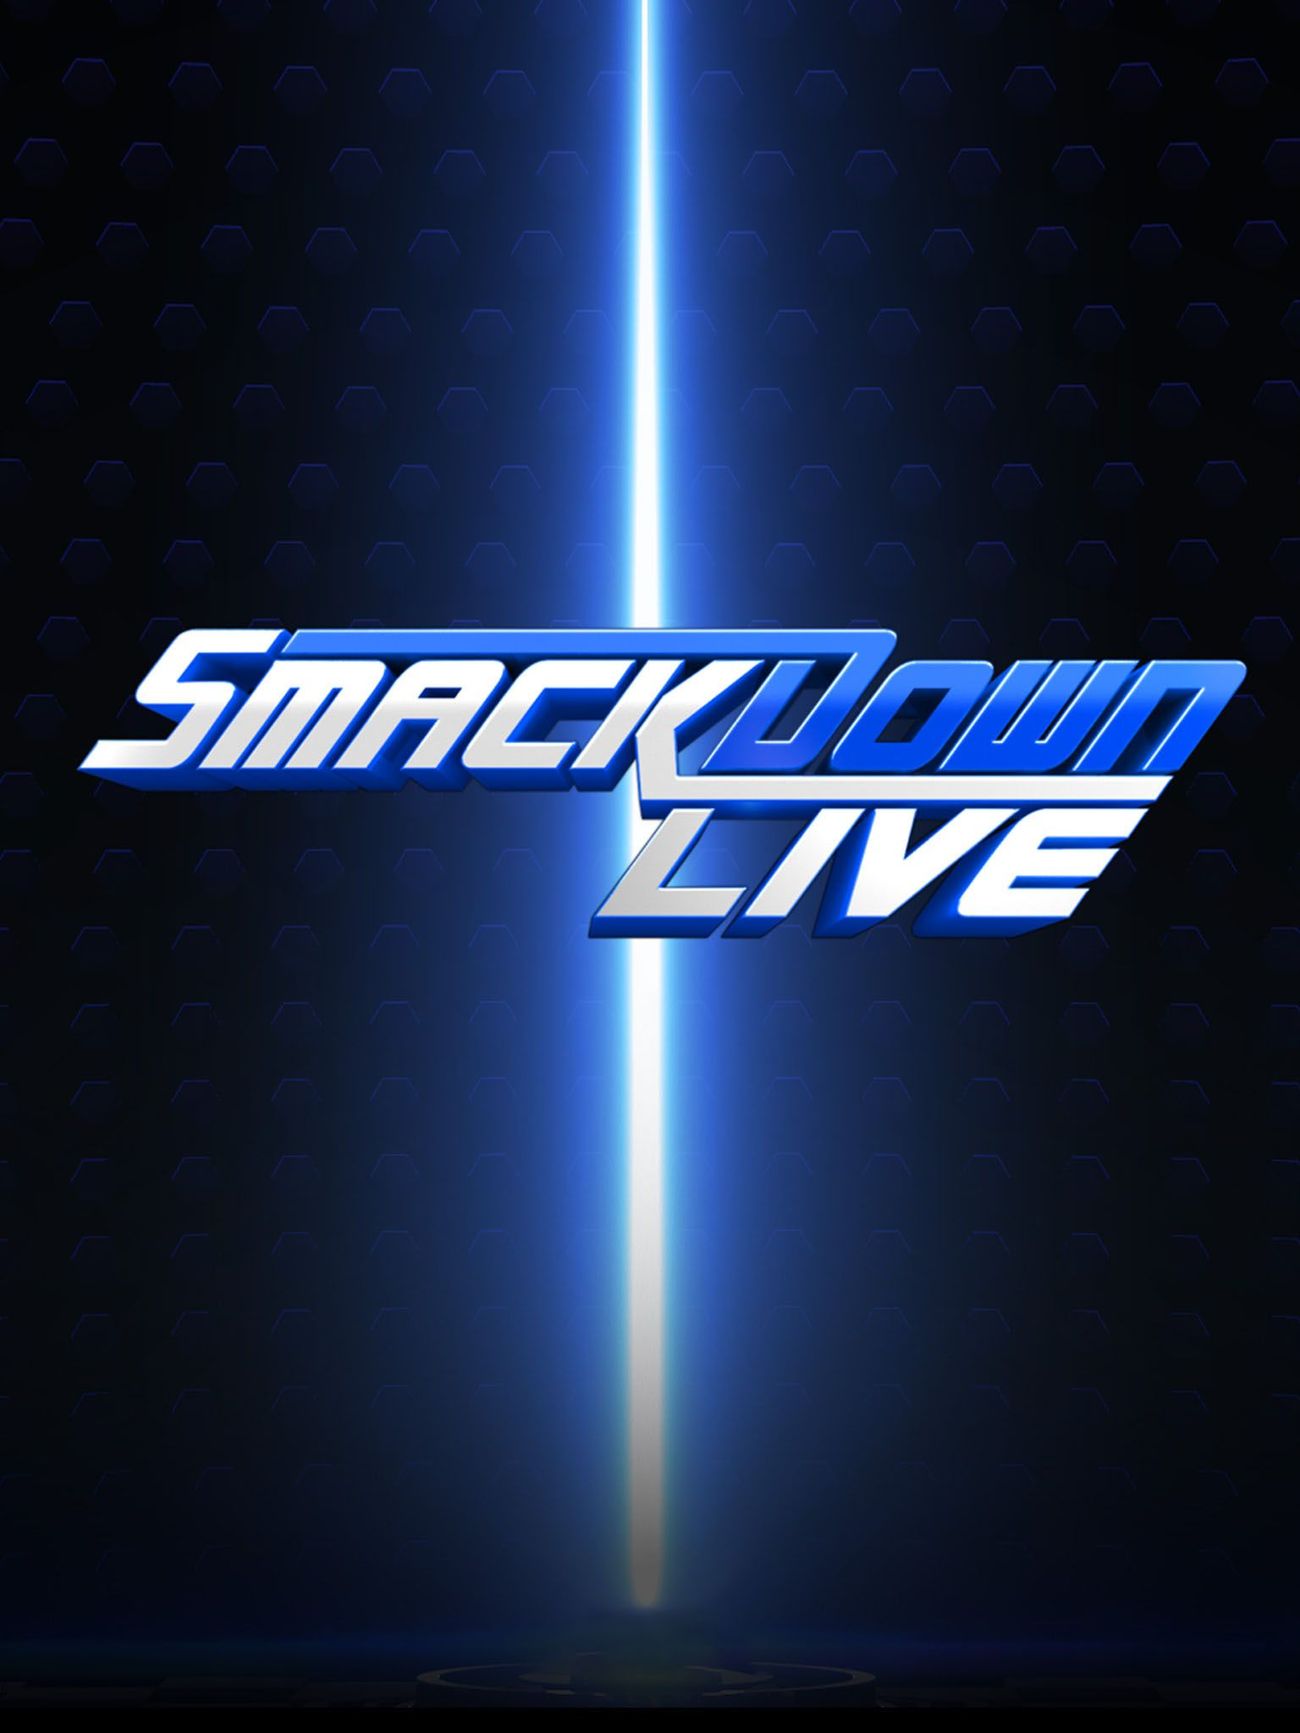 WWE Friday Night SmackDown 22 January (2021) HDTV EngLish 720p [ 700MB ] || 480p [ 350MB ] download